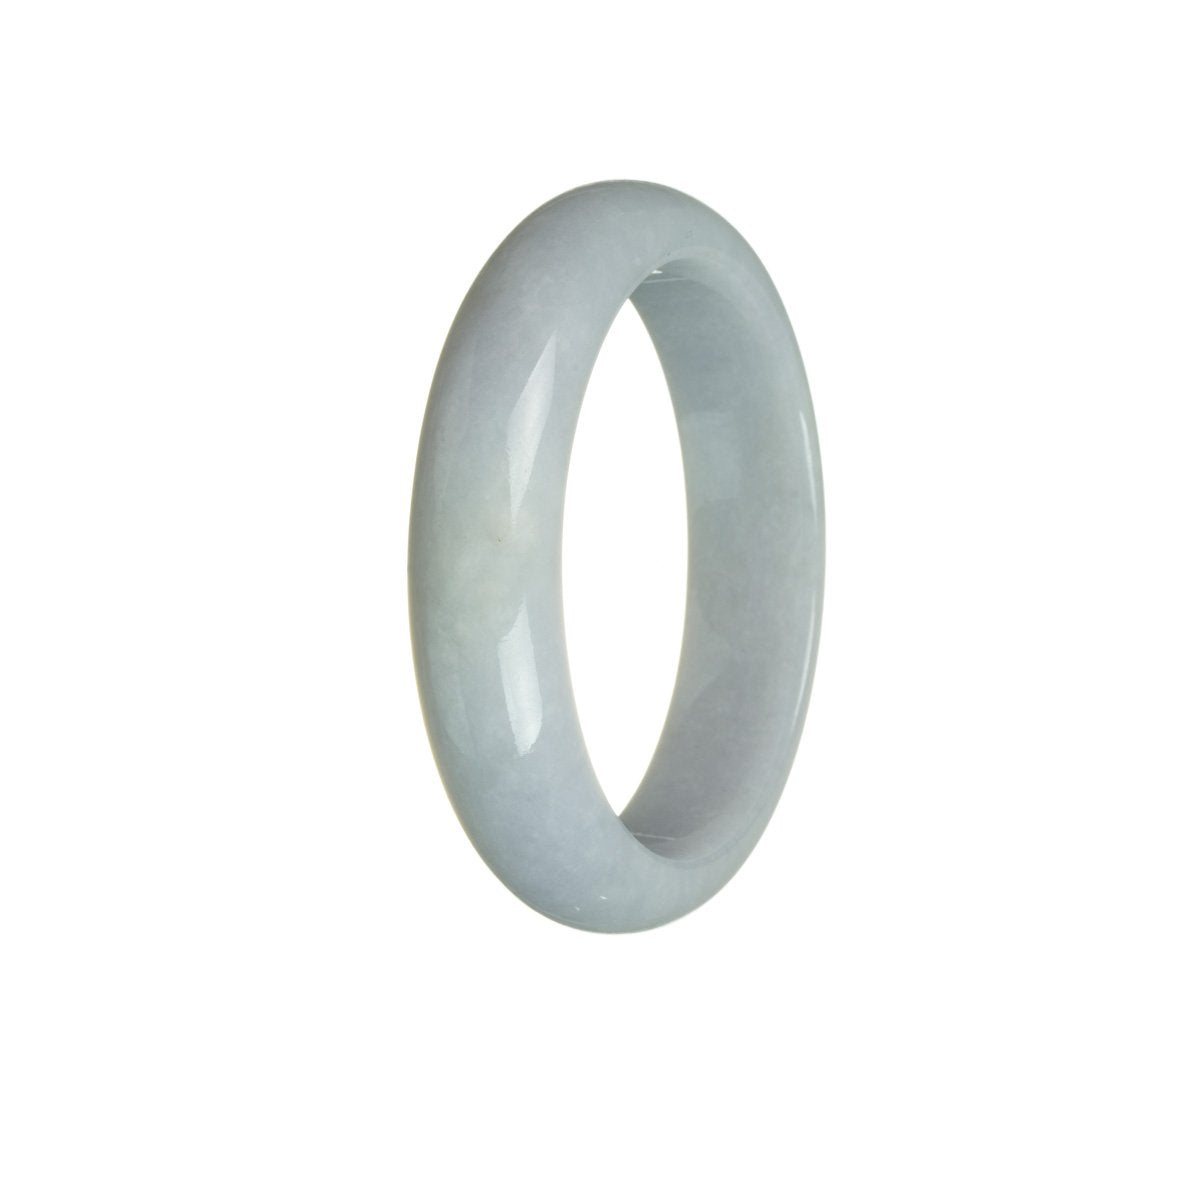 A lavender traditional jade bangle with a half-moon shape, 55mm in size.